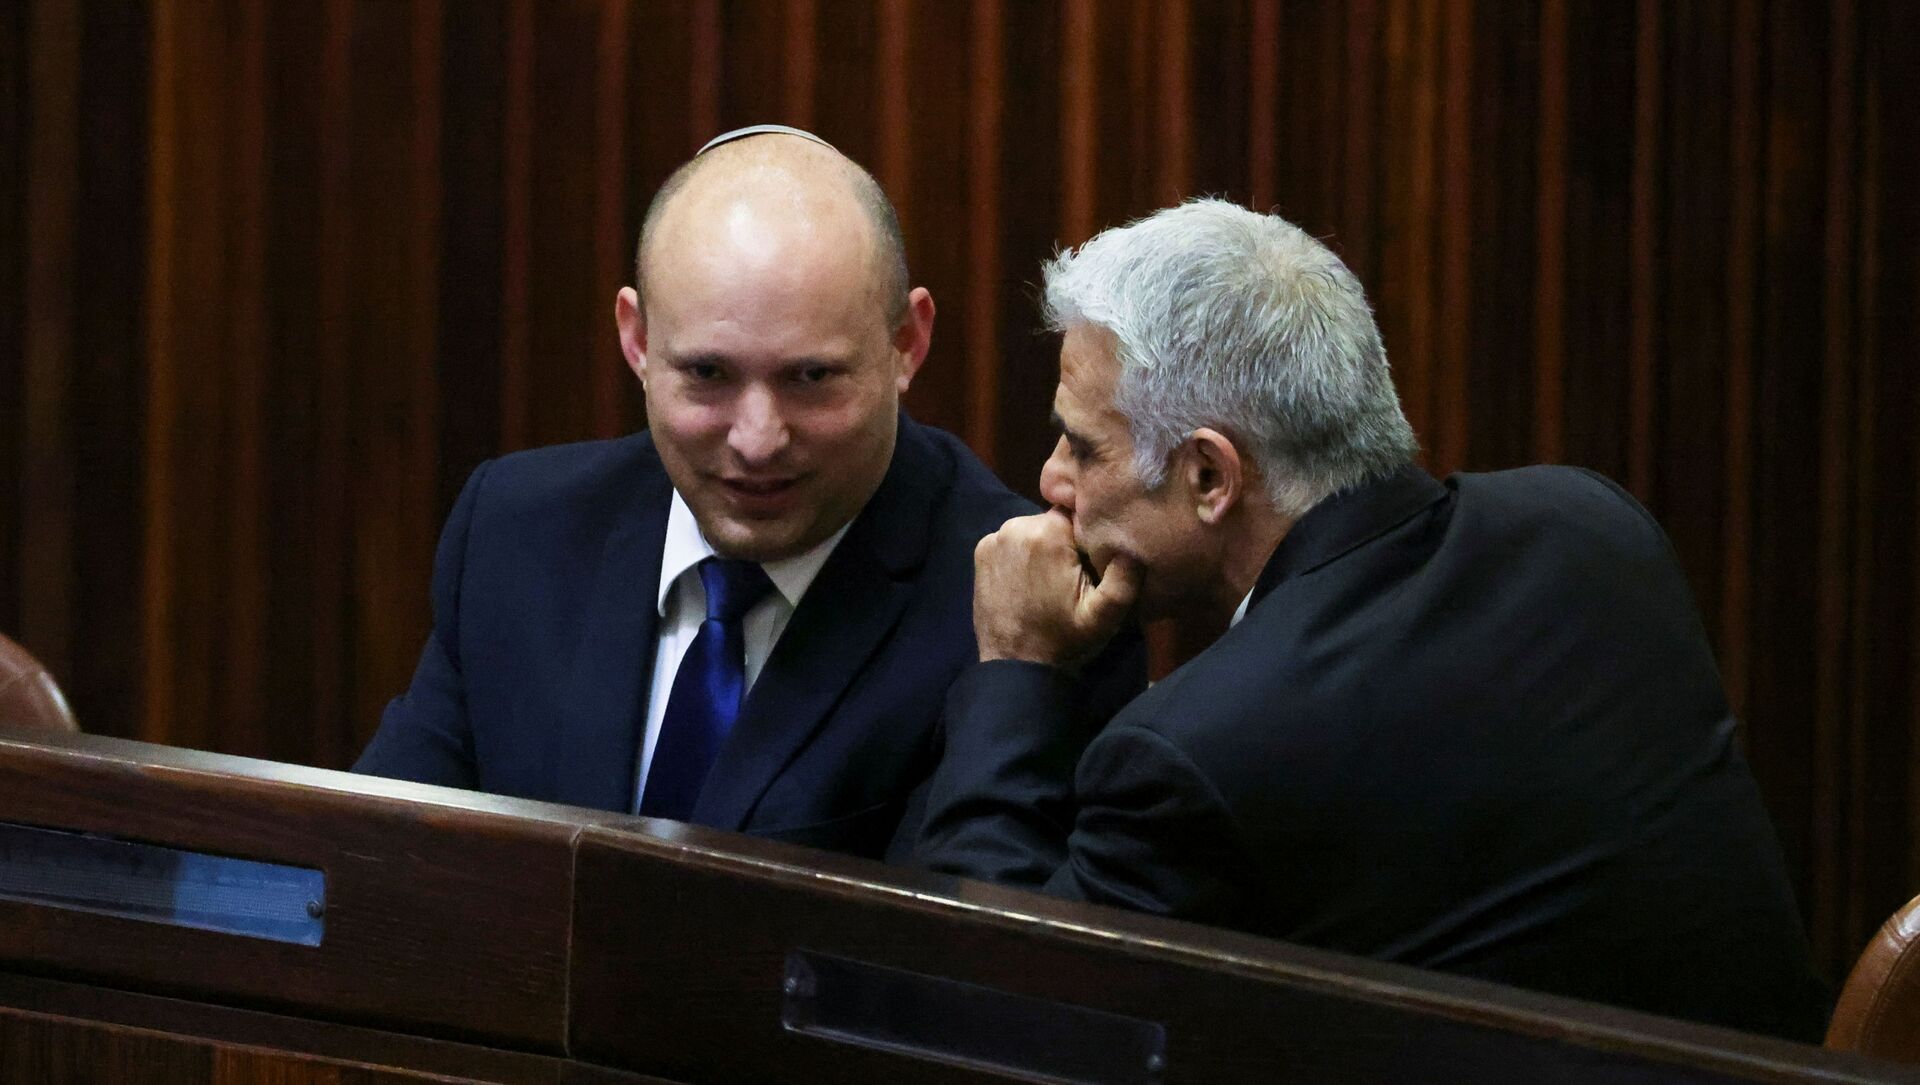 Yamina party leader Naftali Bennett smiles as he speaks to Yesh Atid party leader Yair Lapid, during a special session of the Knesset whereby Israeli lawmakers elect a new president, at the plenum in the Knesset, Israel's parliament, in Jerusalem June 2, 2021.  - Sputnik International, 1920, 02.06.2021